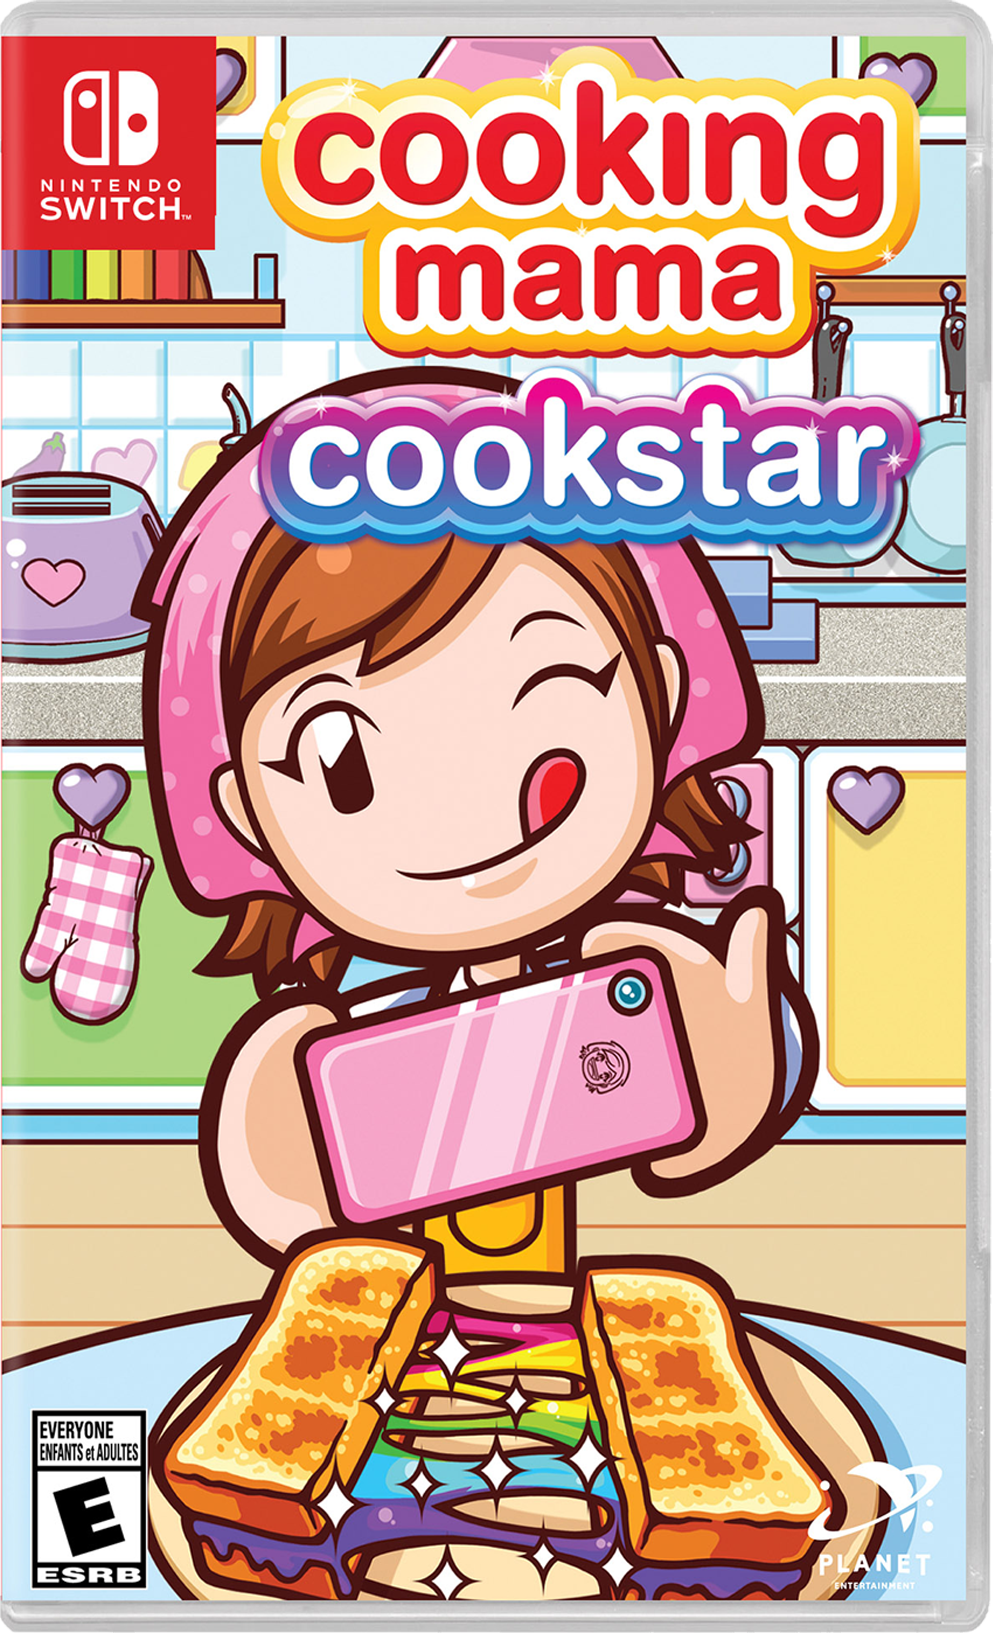 https://static.wikia.nocookie.net/cookingmama/images/9/9f/Cooking_Mama_Cookstar_-_Box_Art.png/revision/latest?cb=20200402071509